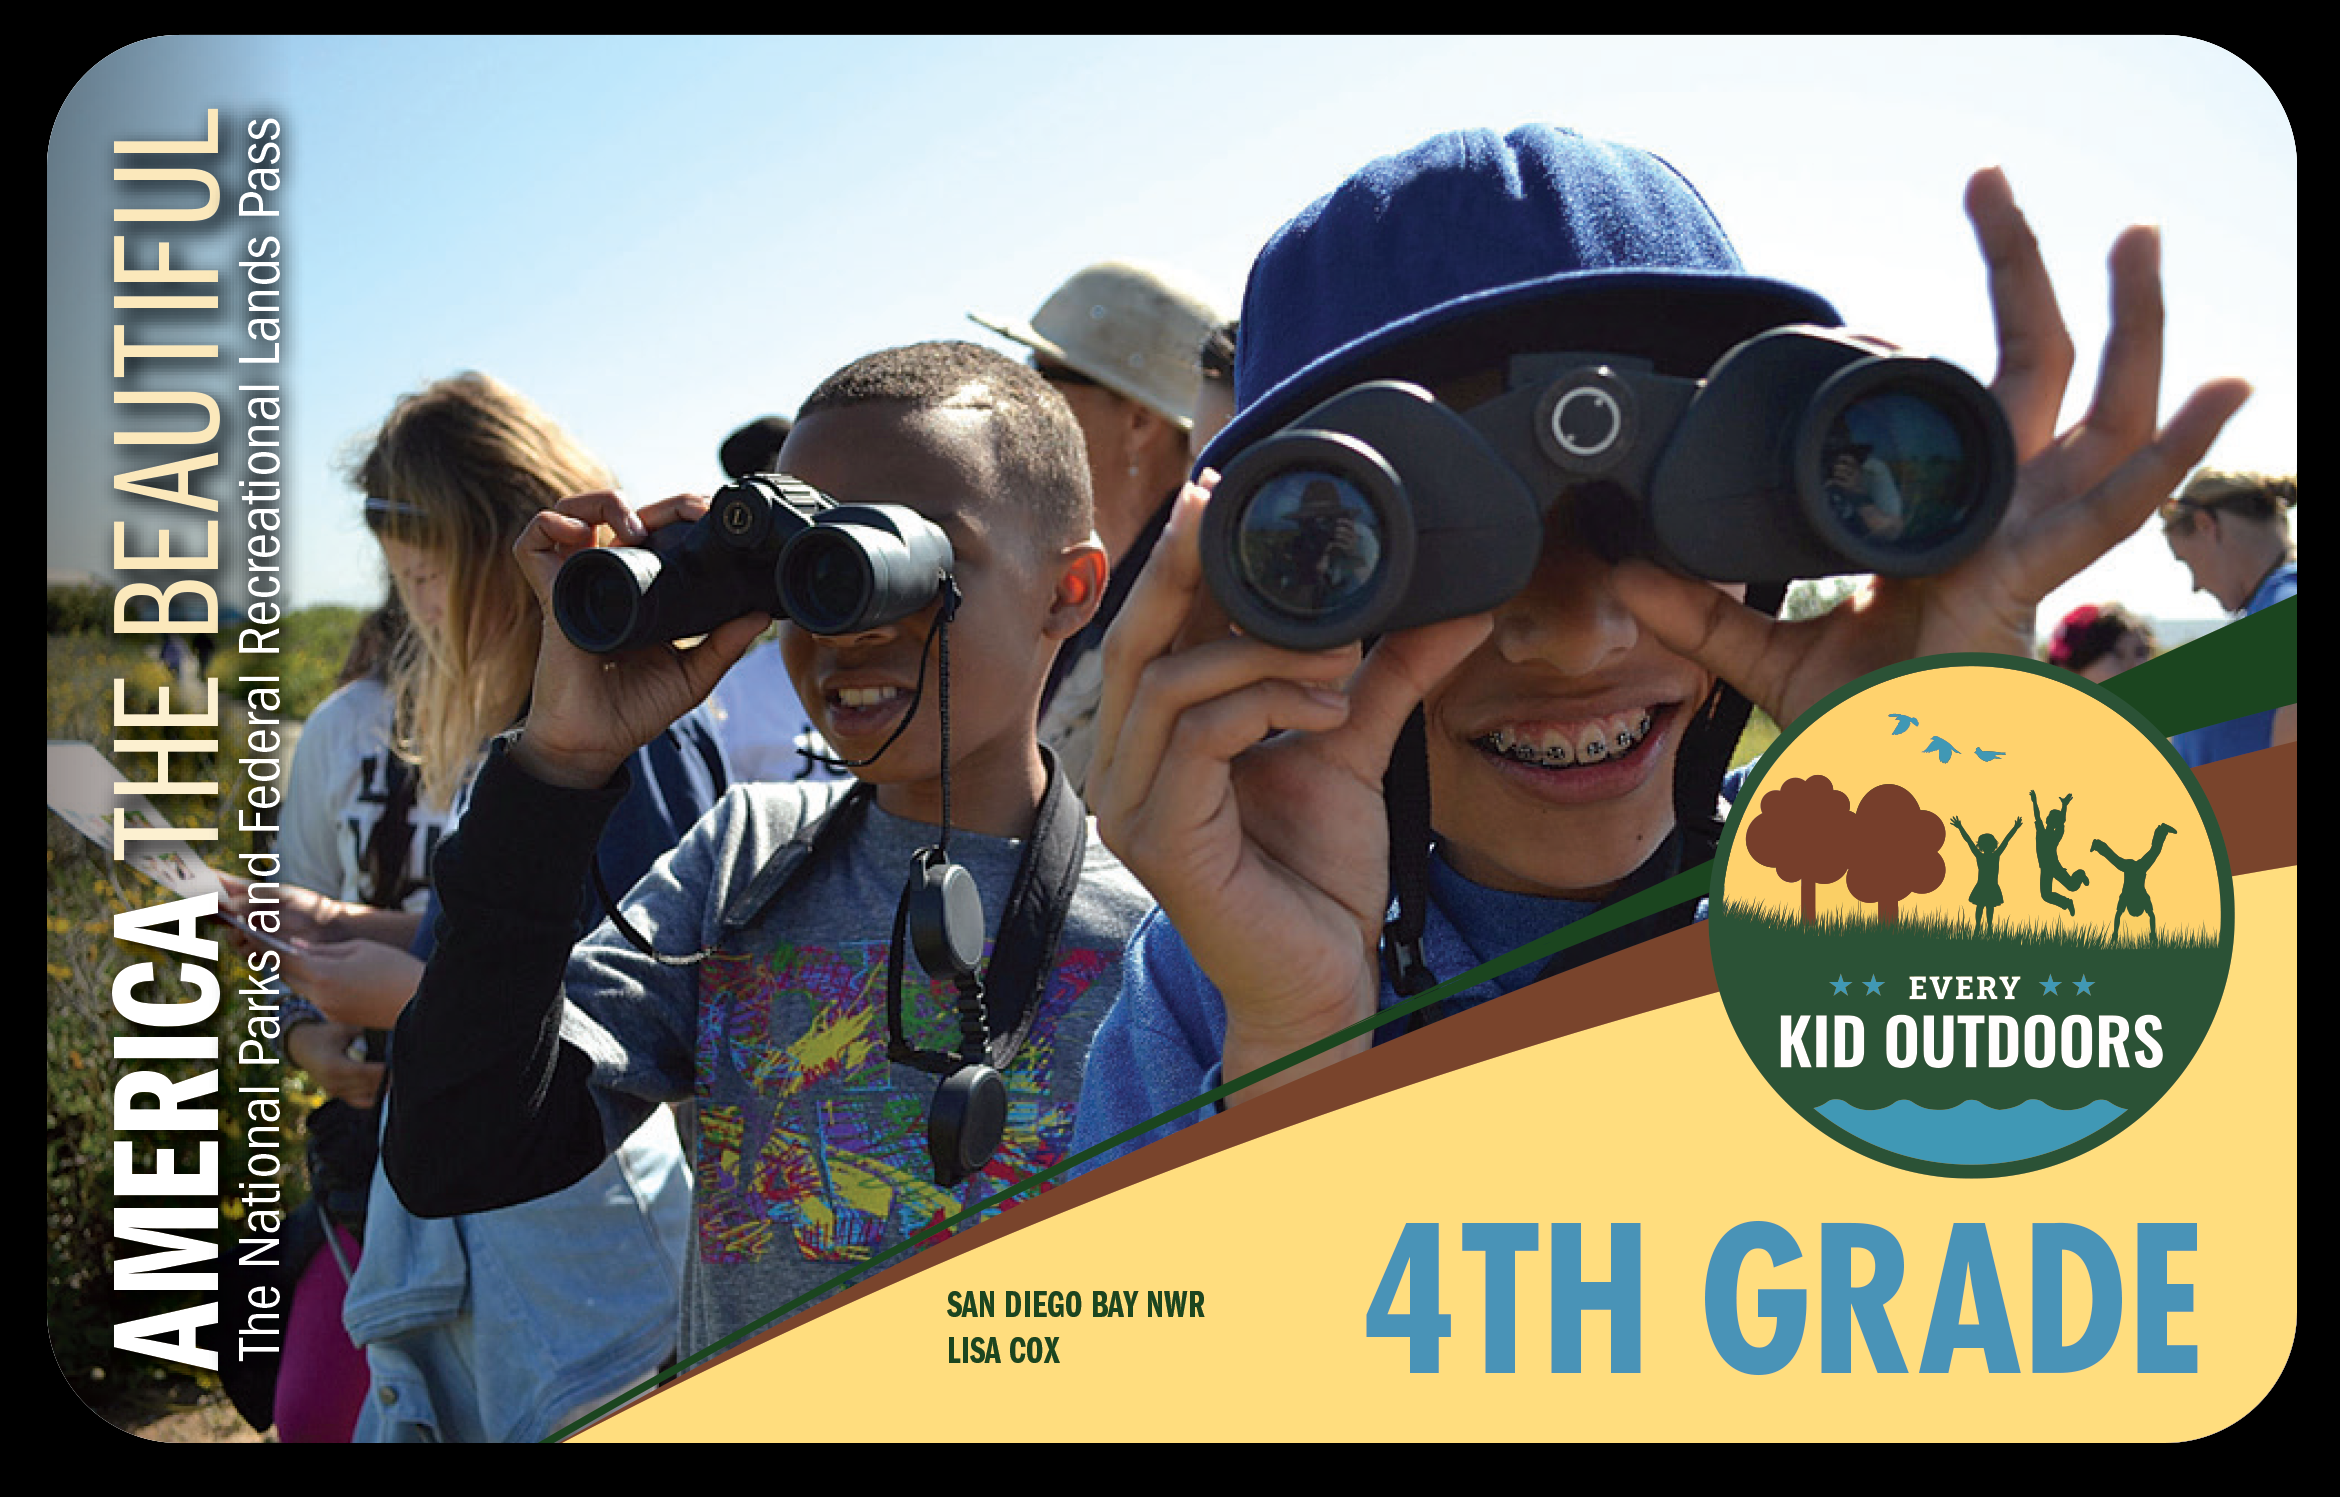 Every Kid Outdoors Pass with an image showing children using binoculars